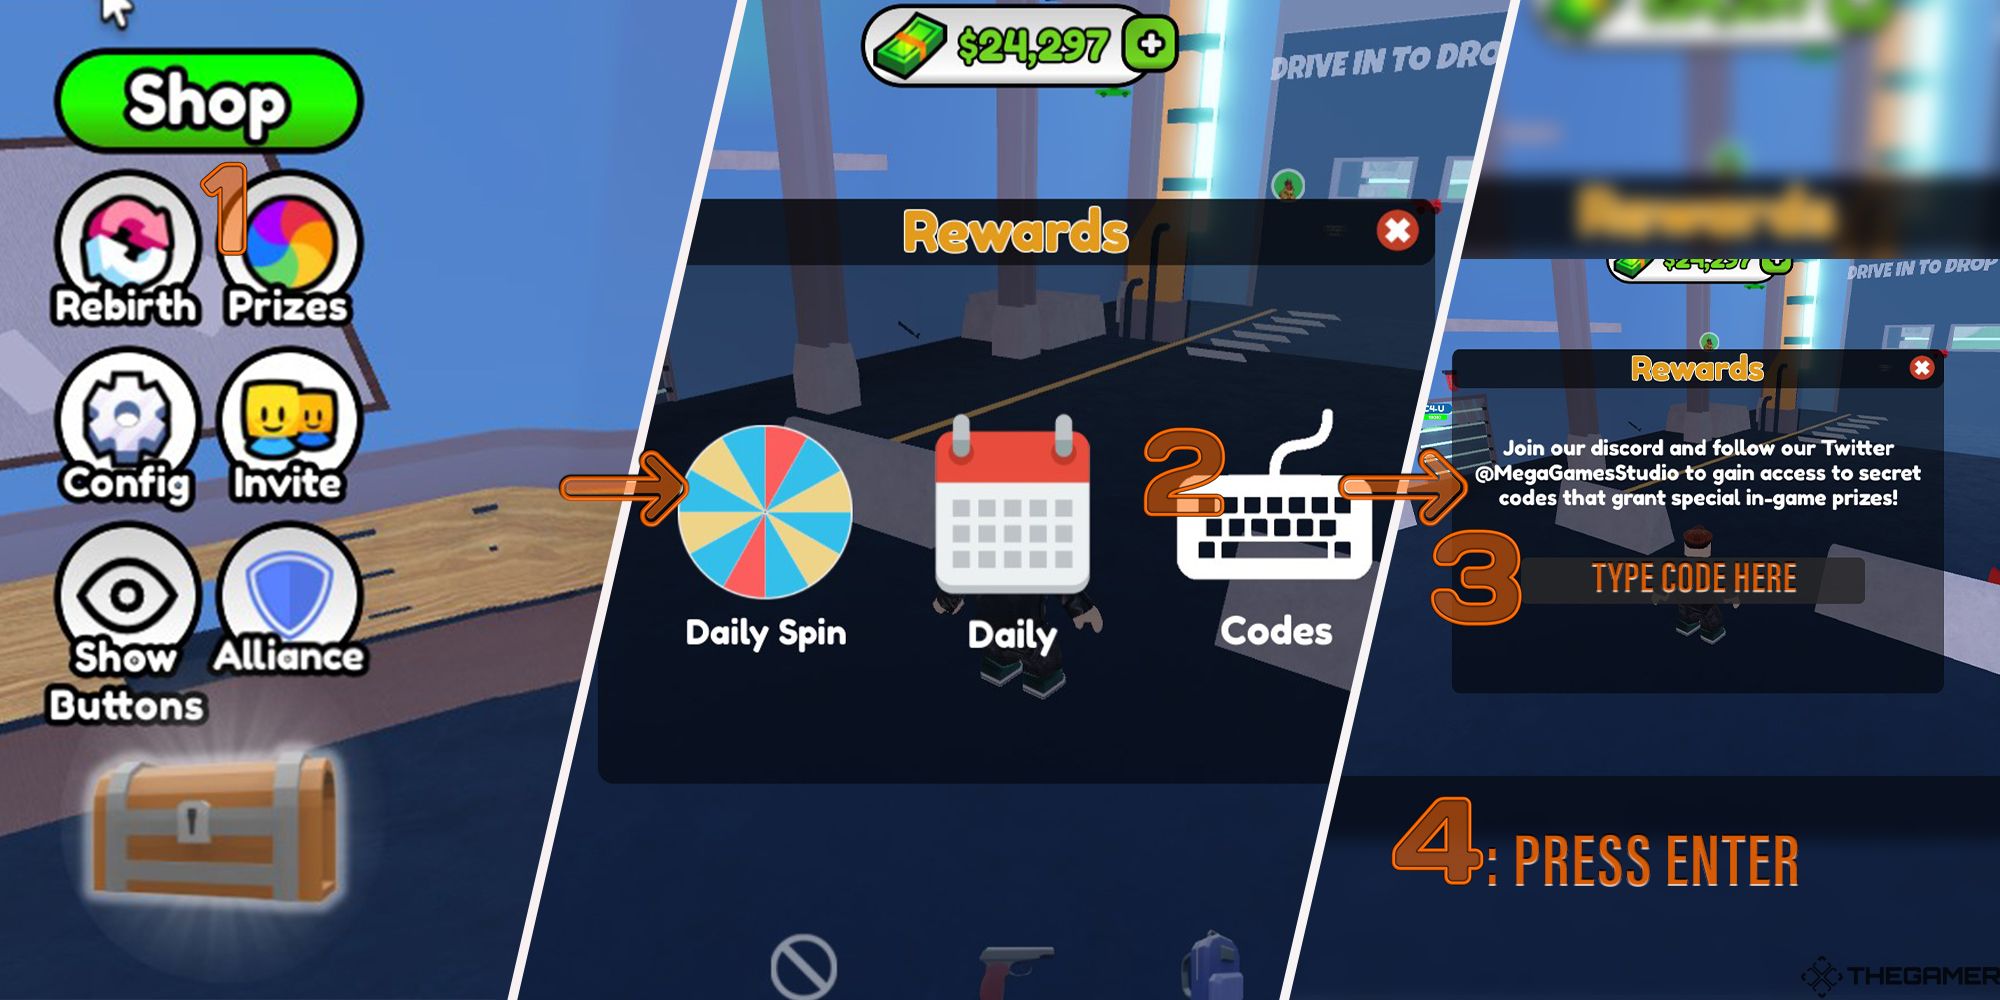 A step-by-step diagram for redeeming promo codes in the Roblox game Ultimate Factory Tycoon.